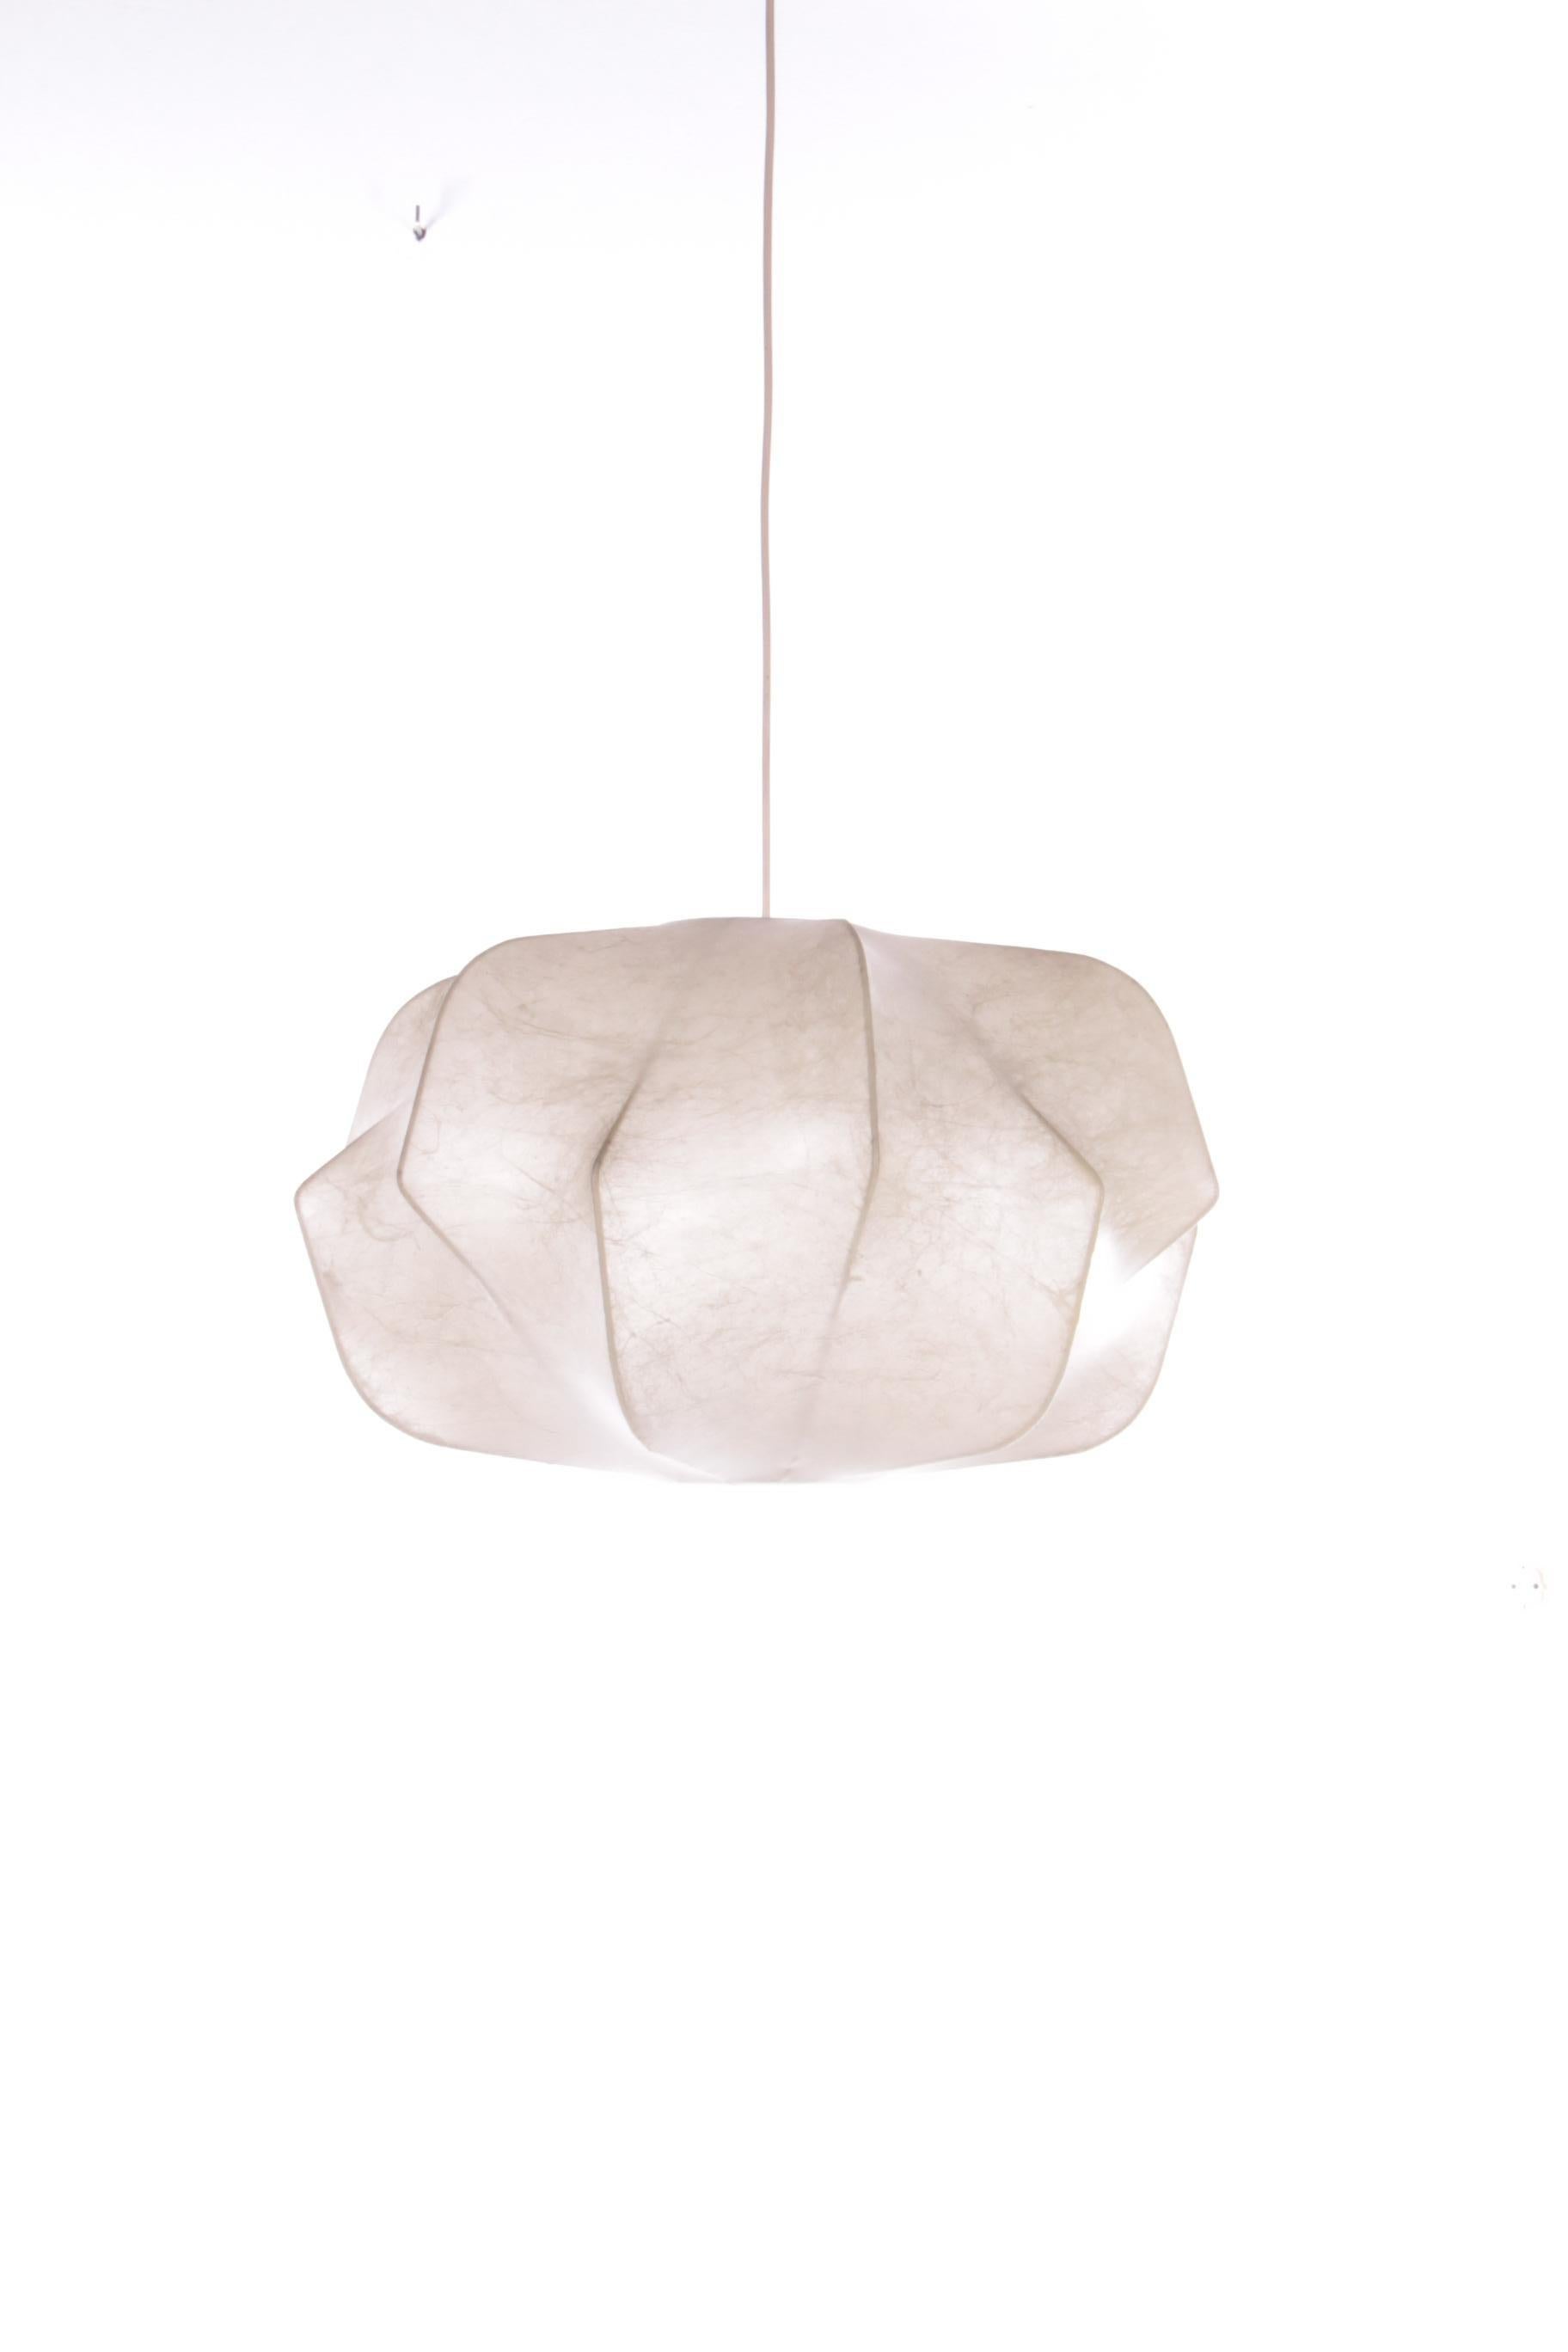 Cocoon pendant lamp by Achille Castiglioni for Flos, 1960s

This is a beautiful bulb lamp or
Cocoon pendant lamp by A.C. for Flos
The main feature of this iconic pendant lamp by architect C. is the new material used to make it. The frame is